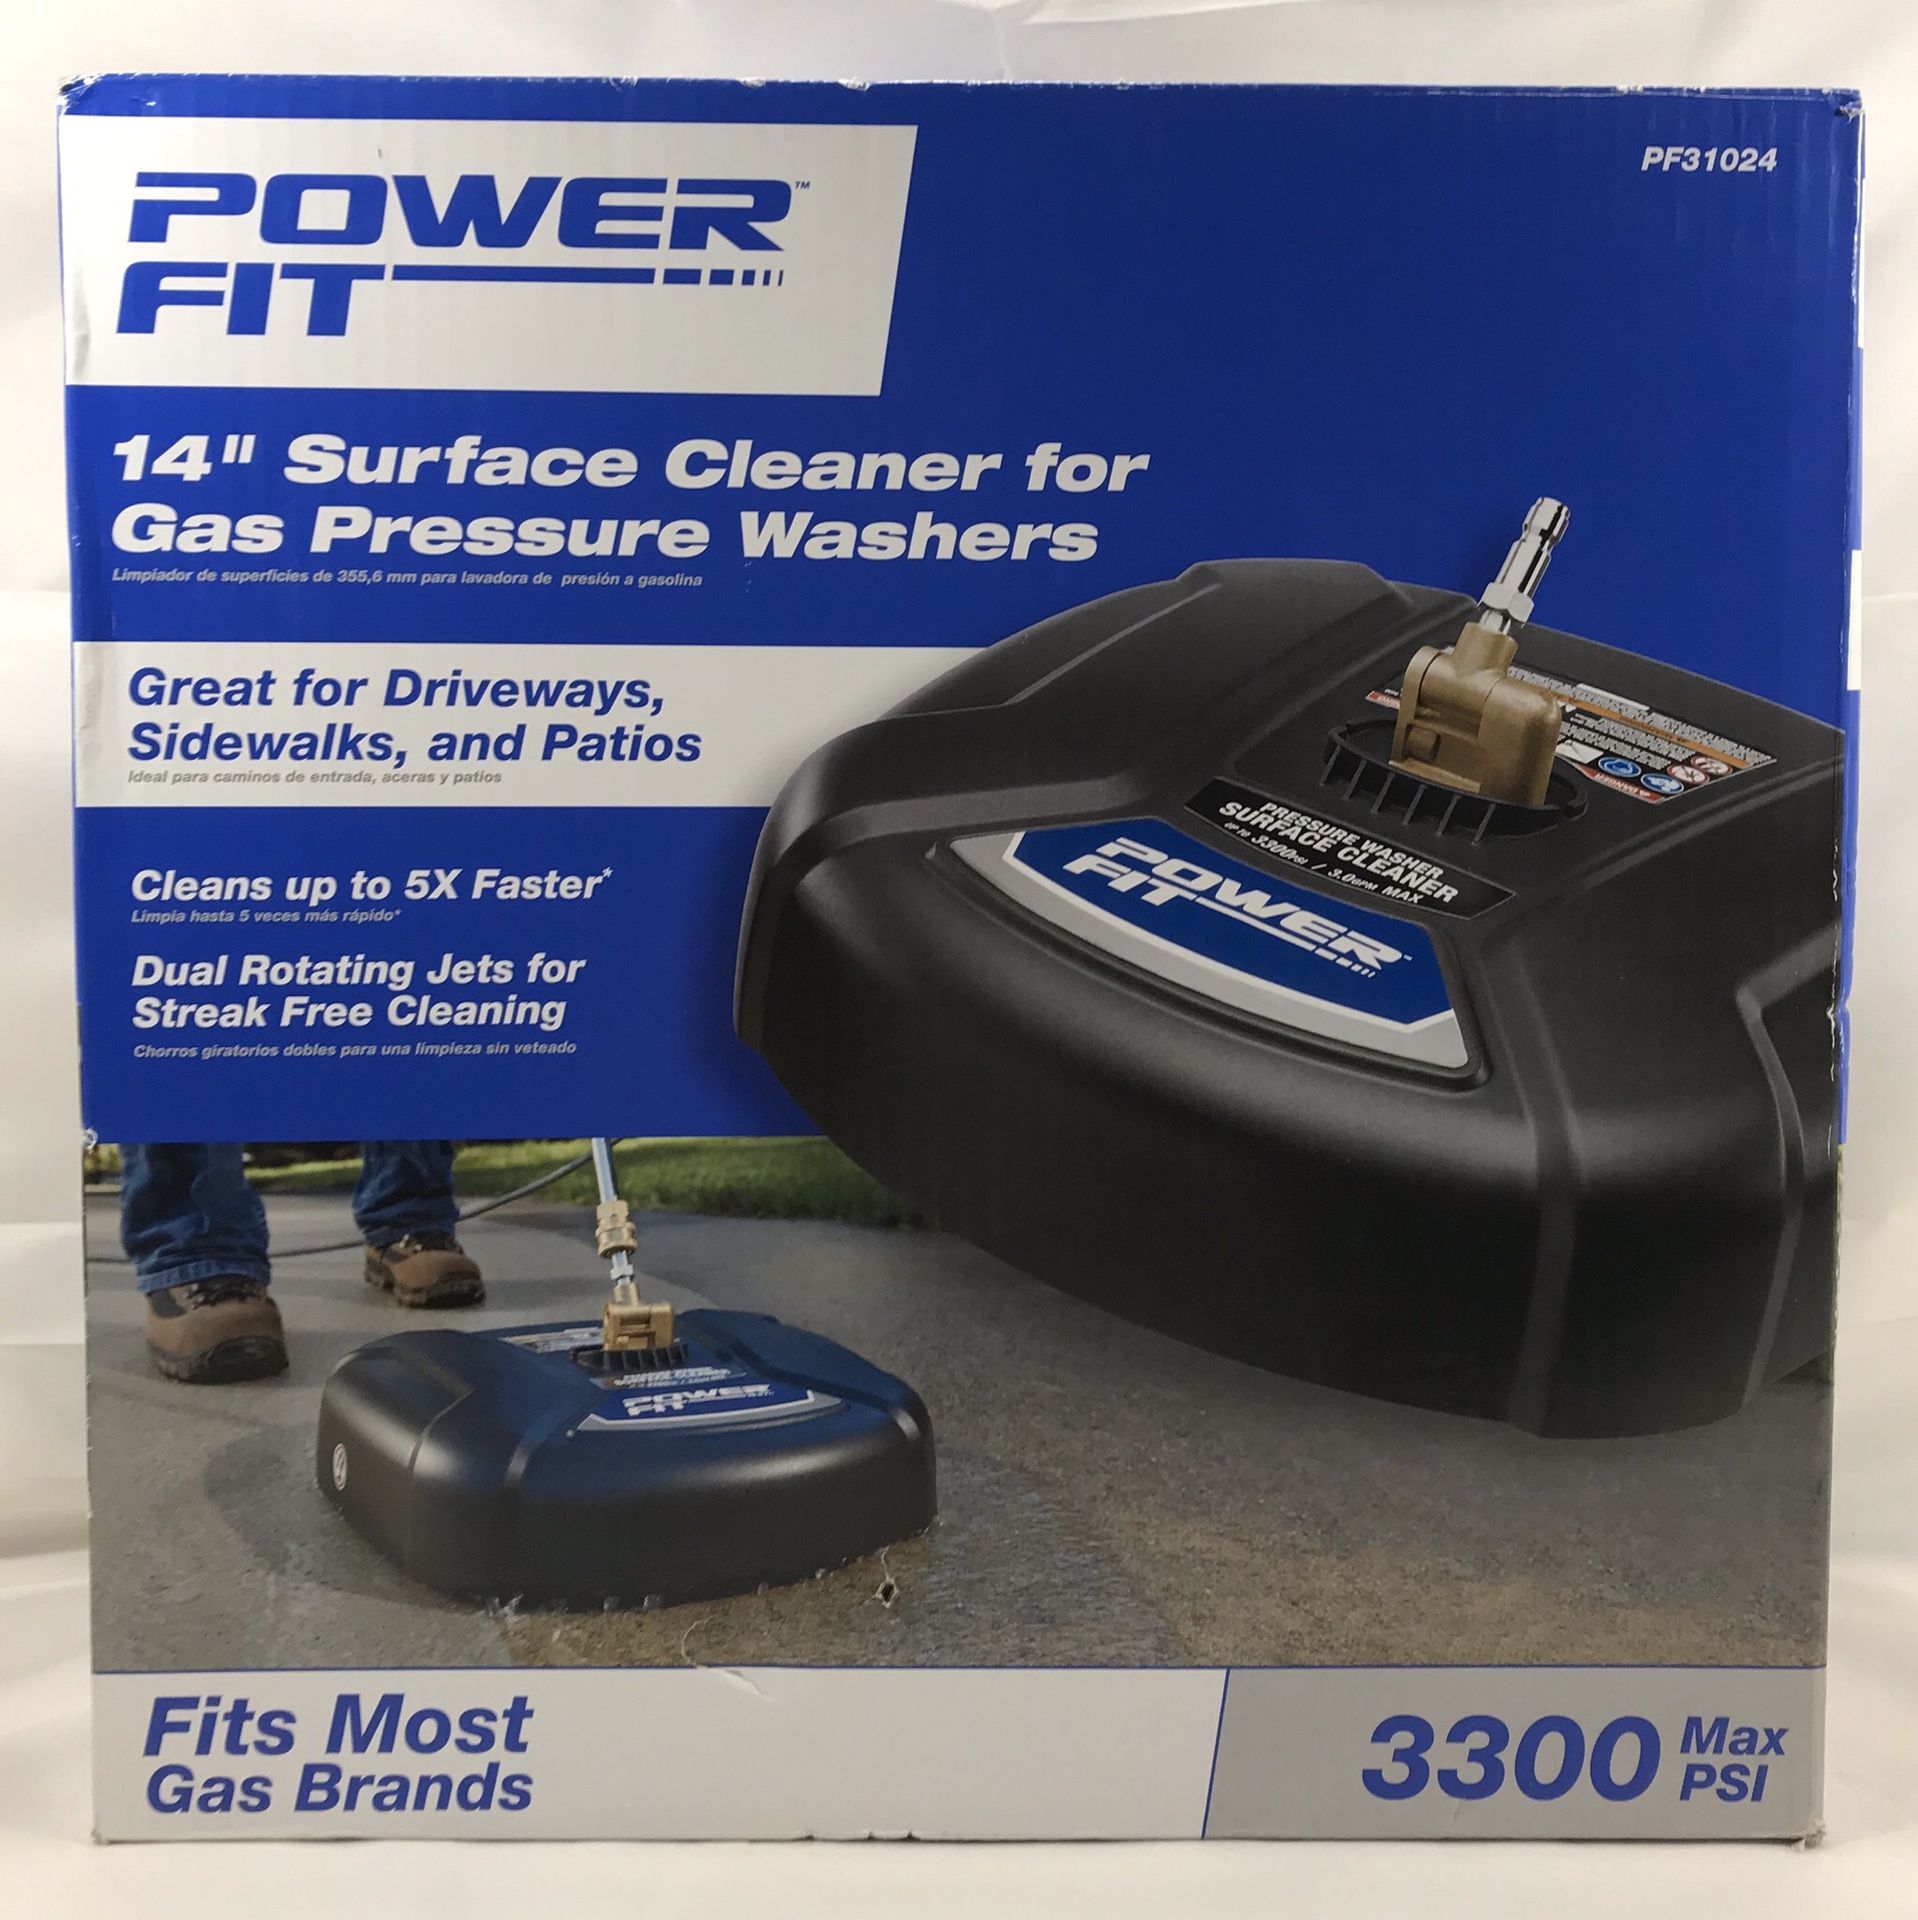 Power fit 14” surface cleaner for gas pressure washers